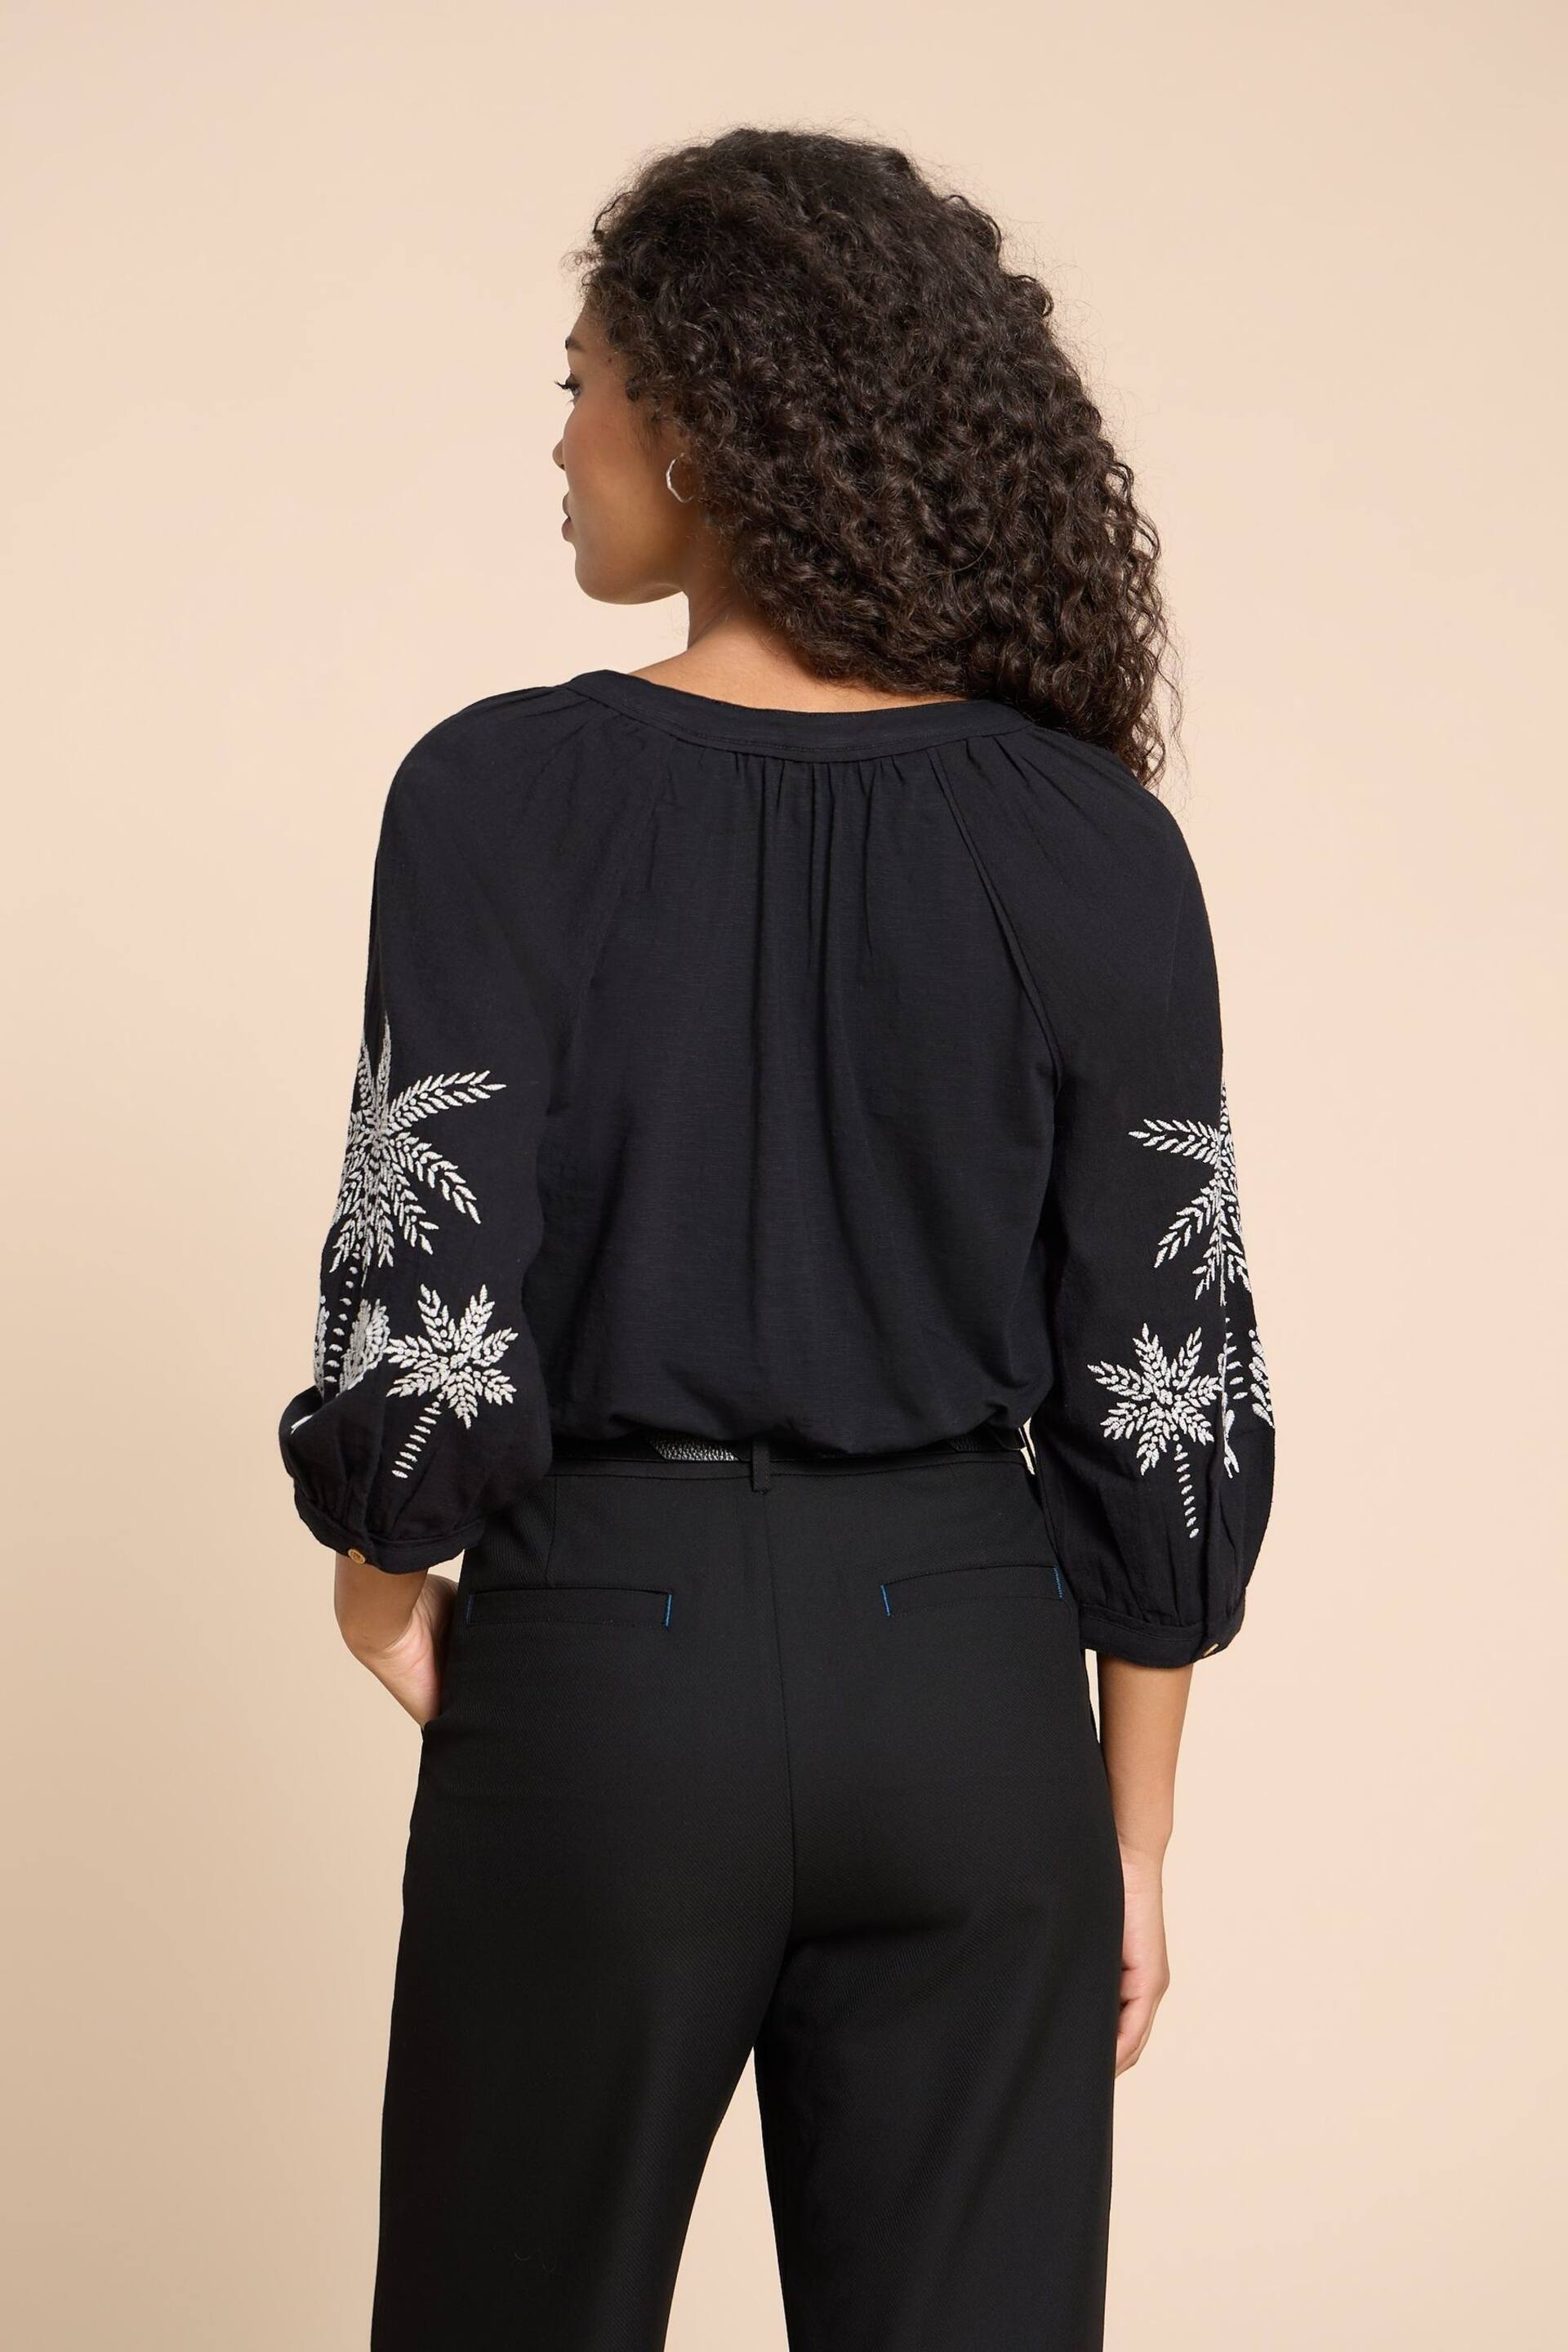 White Stuff Black Mix Embroidered Millie Top - Image 2 of 7